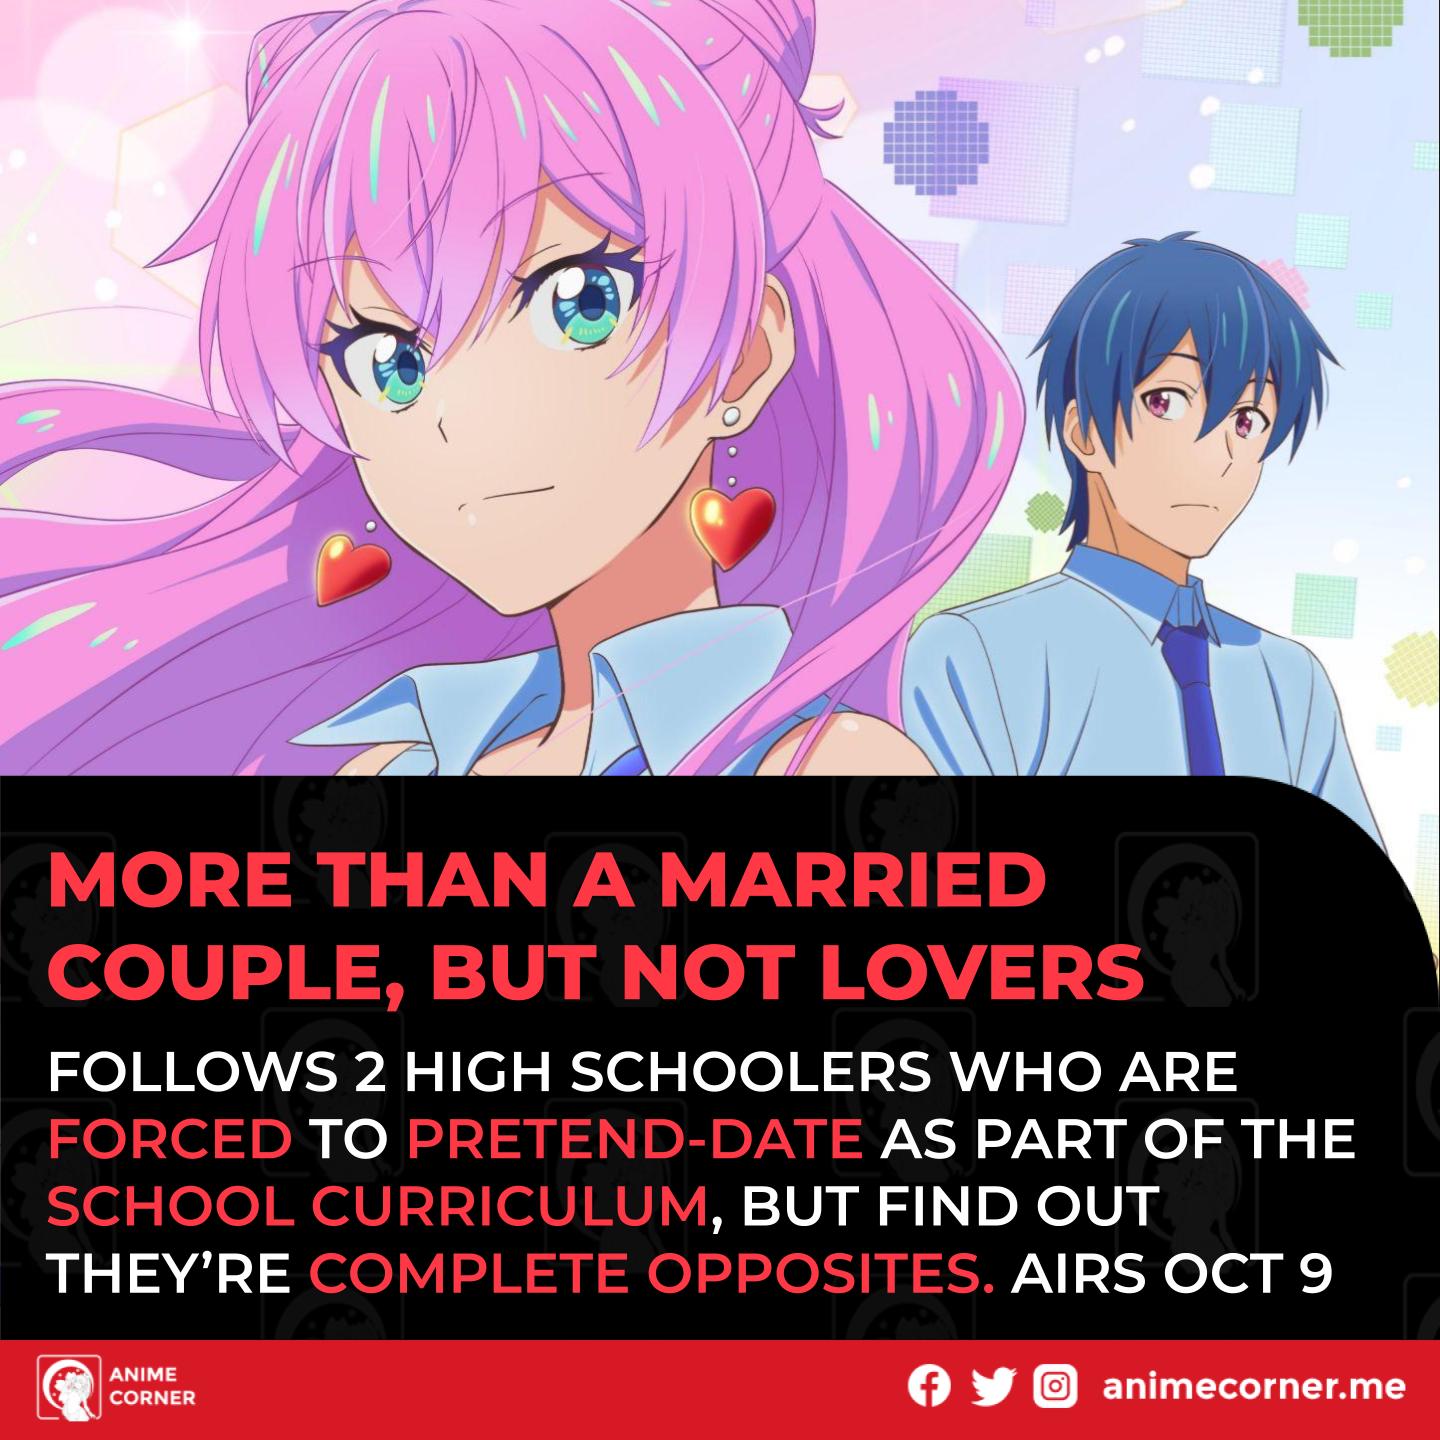 Anime Like More than a Married Couple, but Not Lovers.